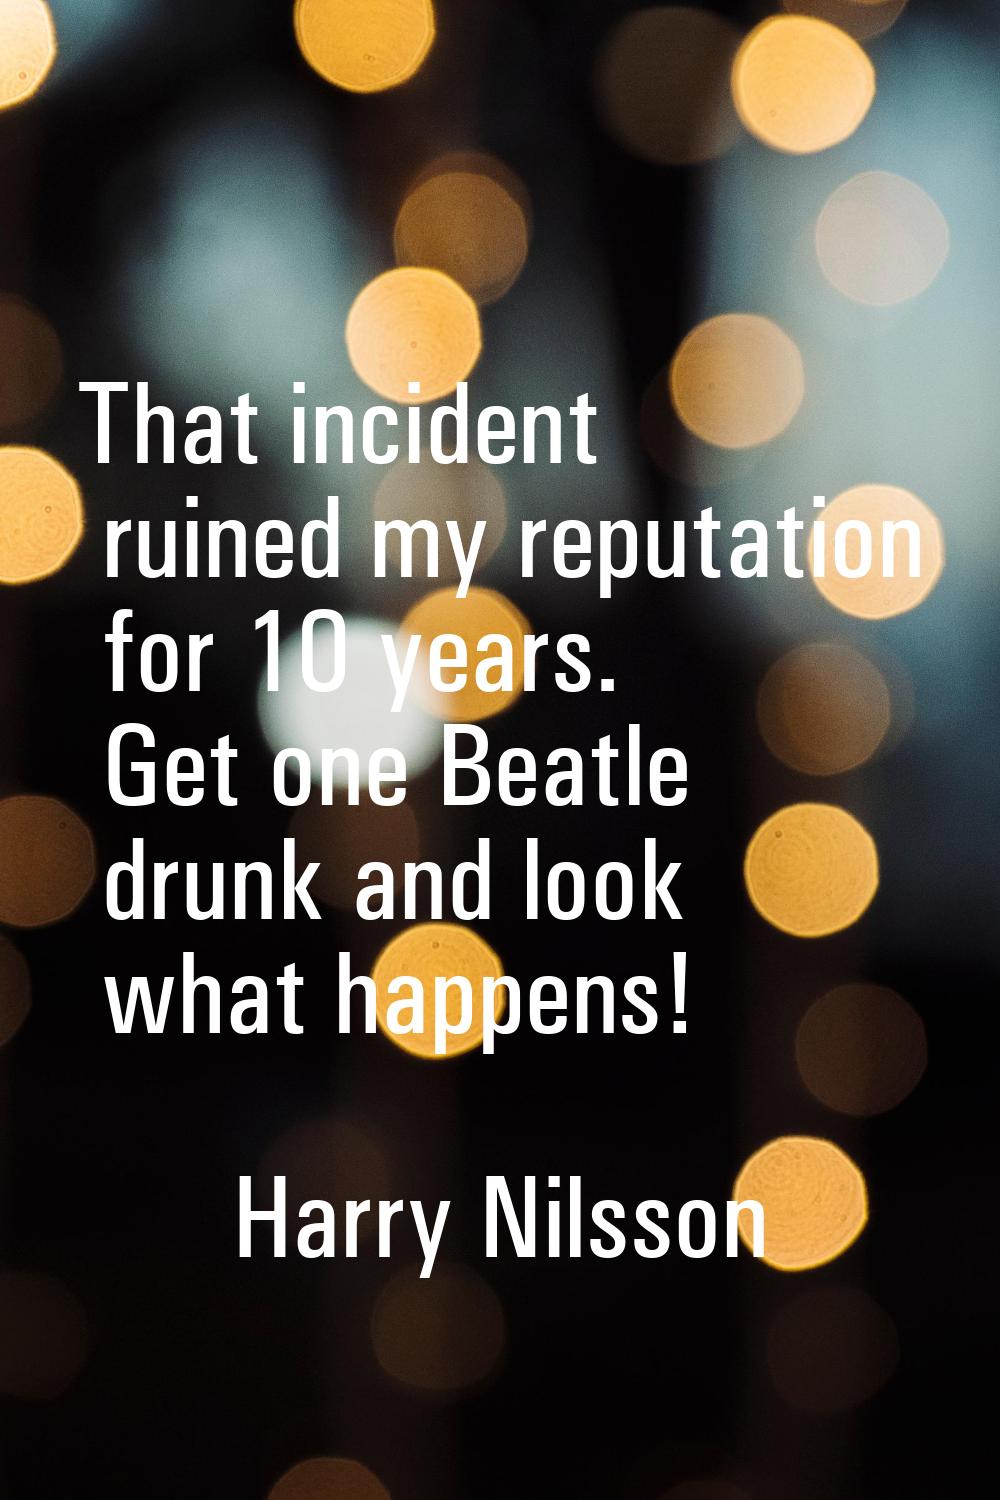 That incident ruined my reputation for 10 years. Get one Beatle drunk and look what happens!